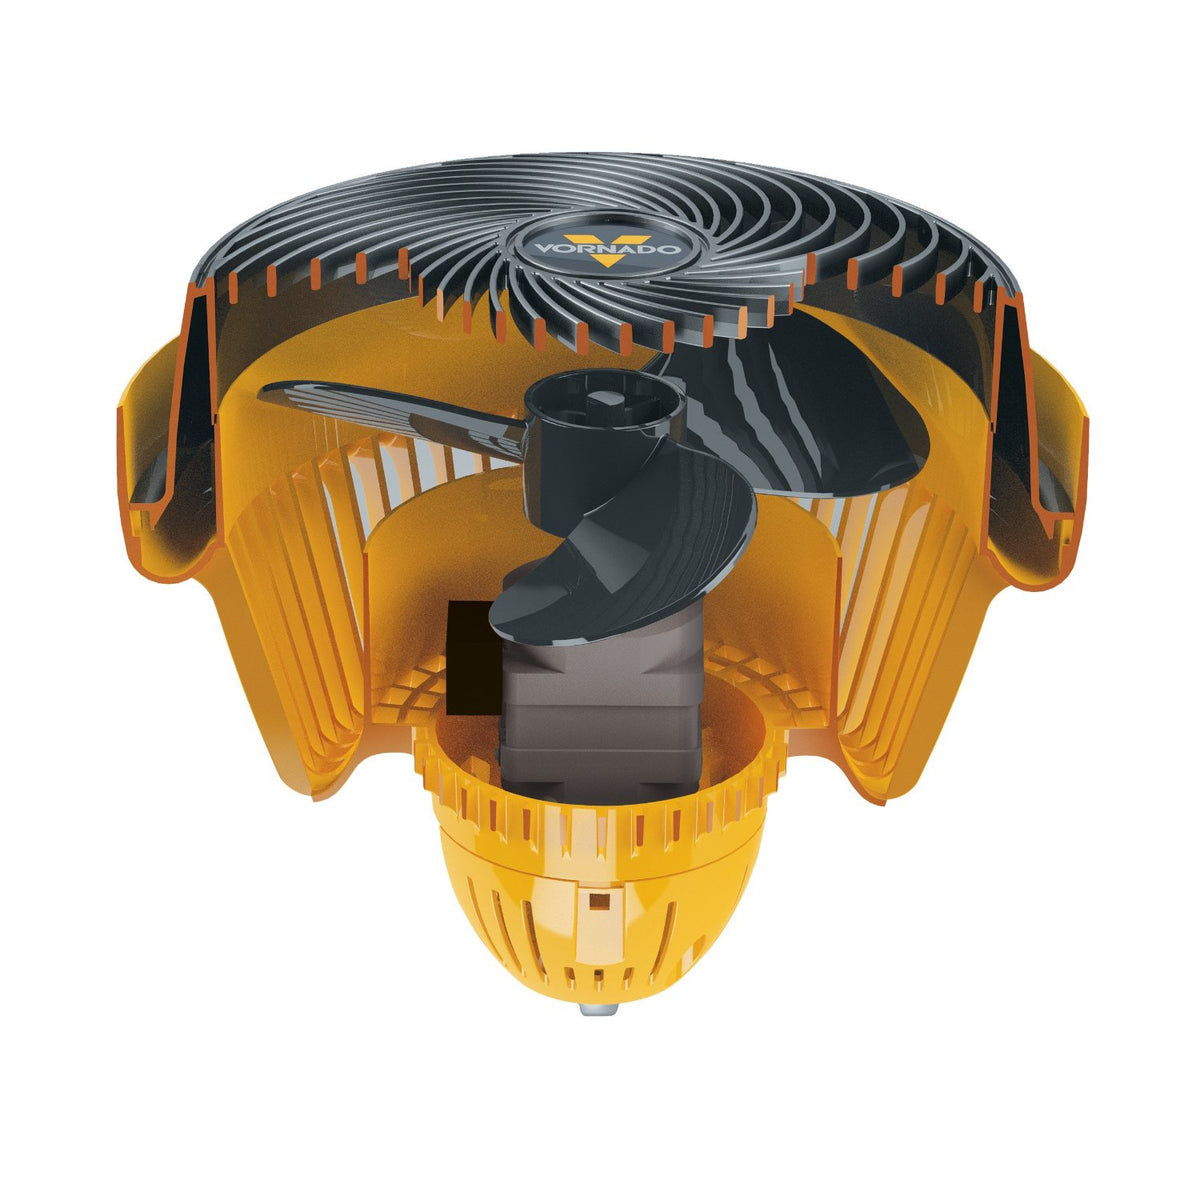 Buy vornado 293hd - Online store for venting & fans, high velocity in USA, on sale, low price, discount deals, coupon code